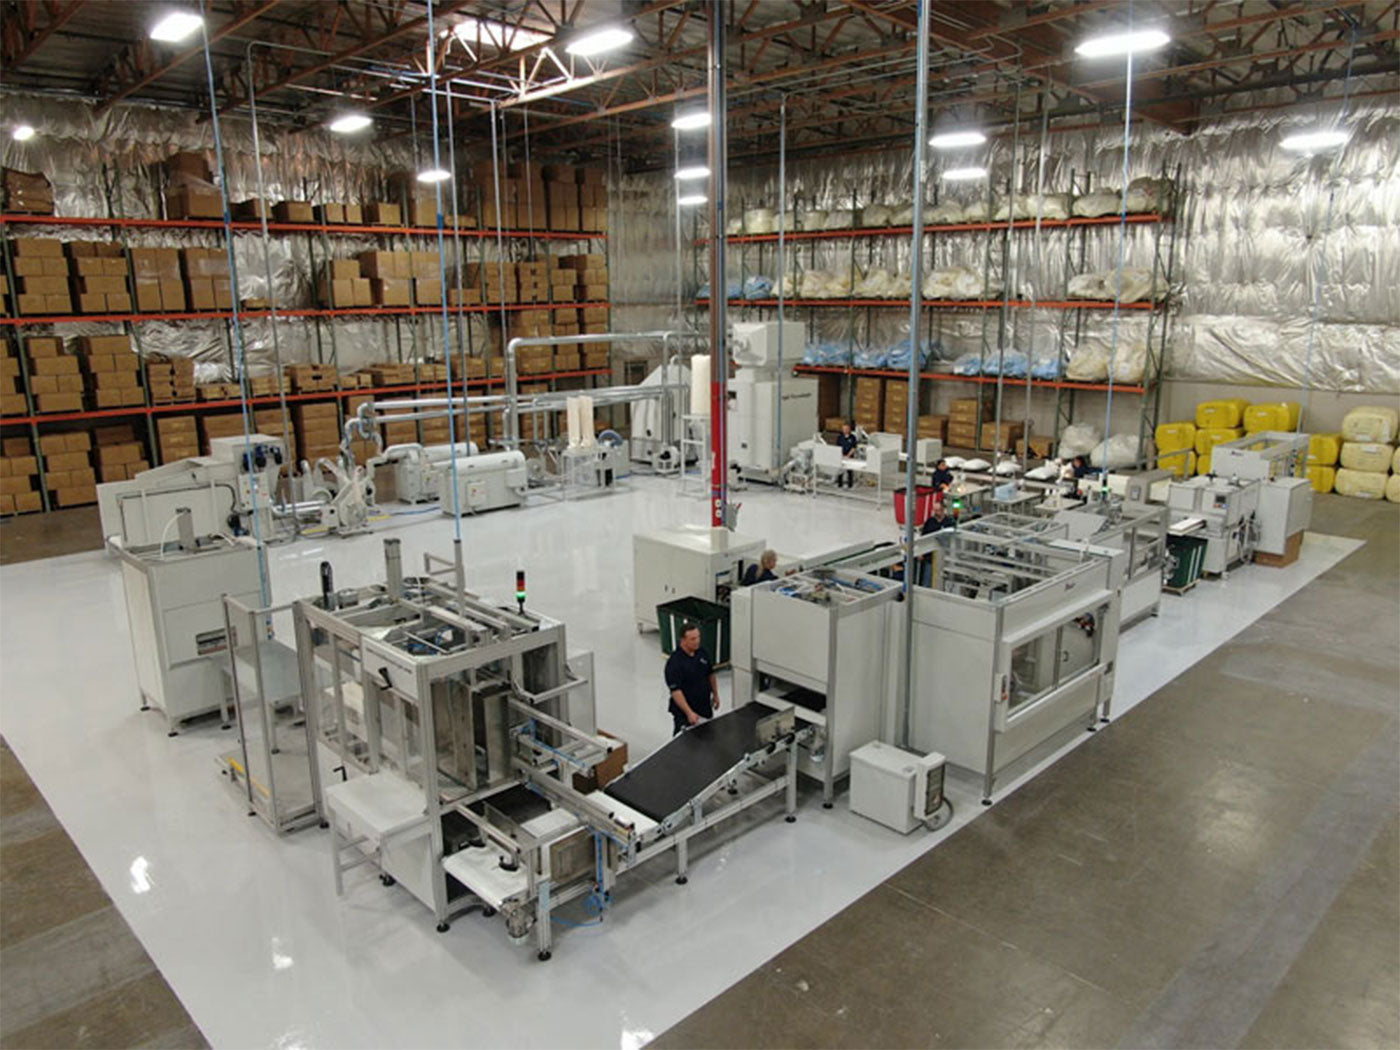 Image of a manufacturing facility